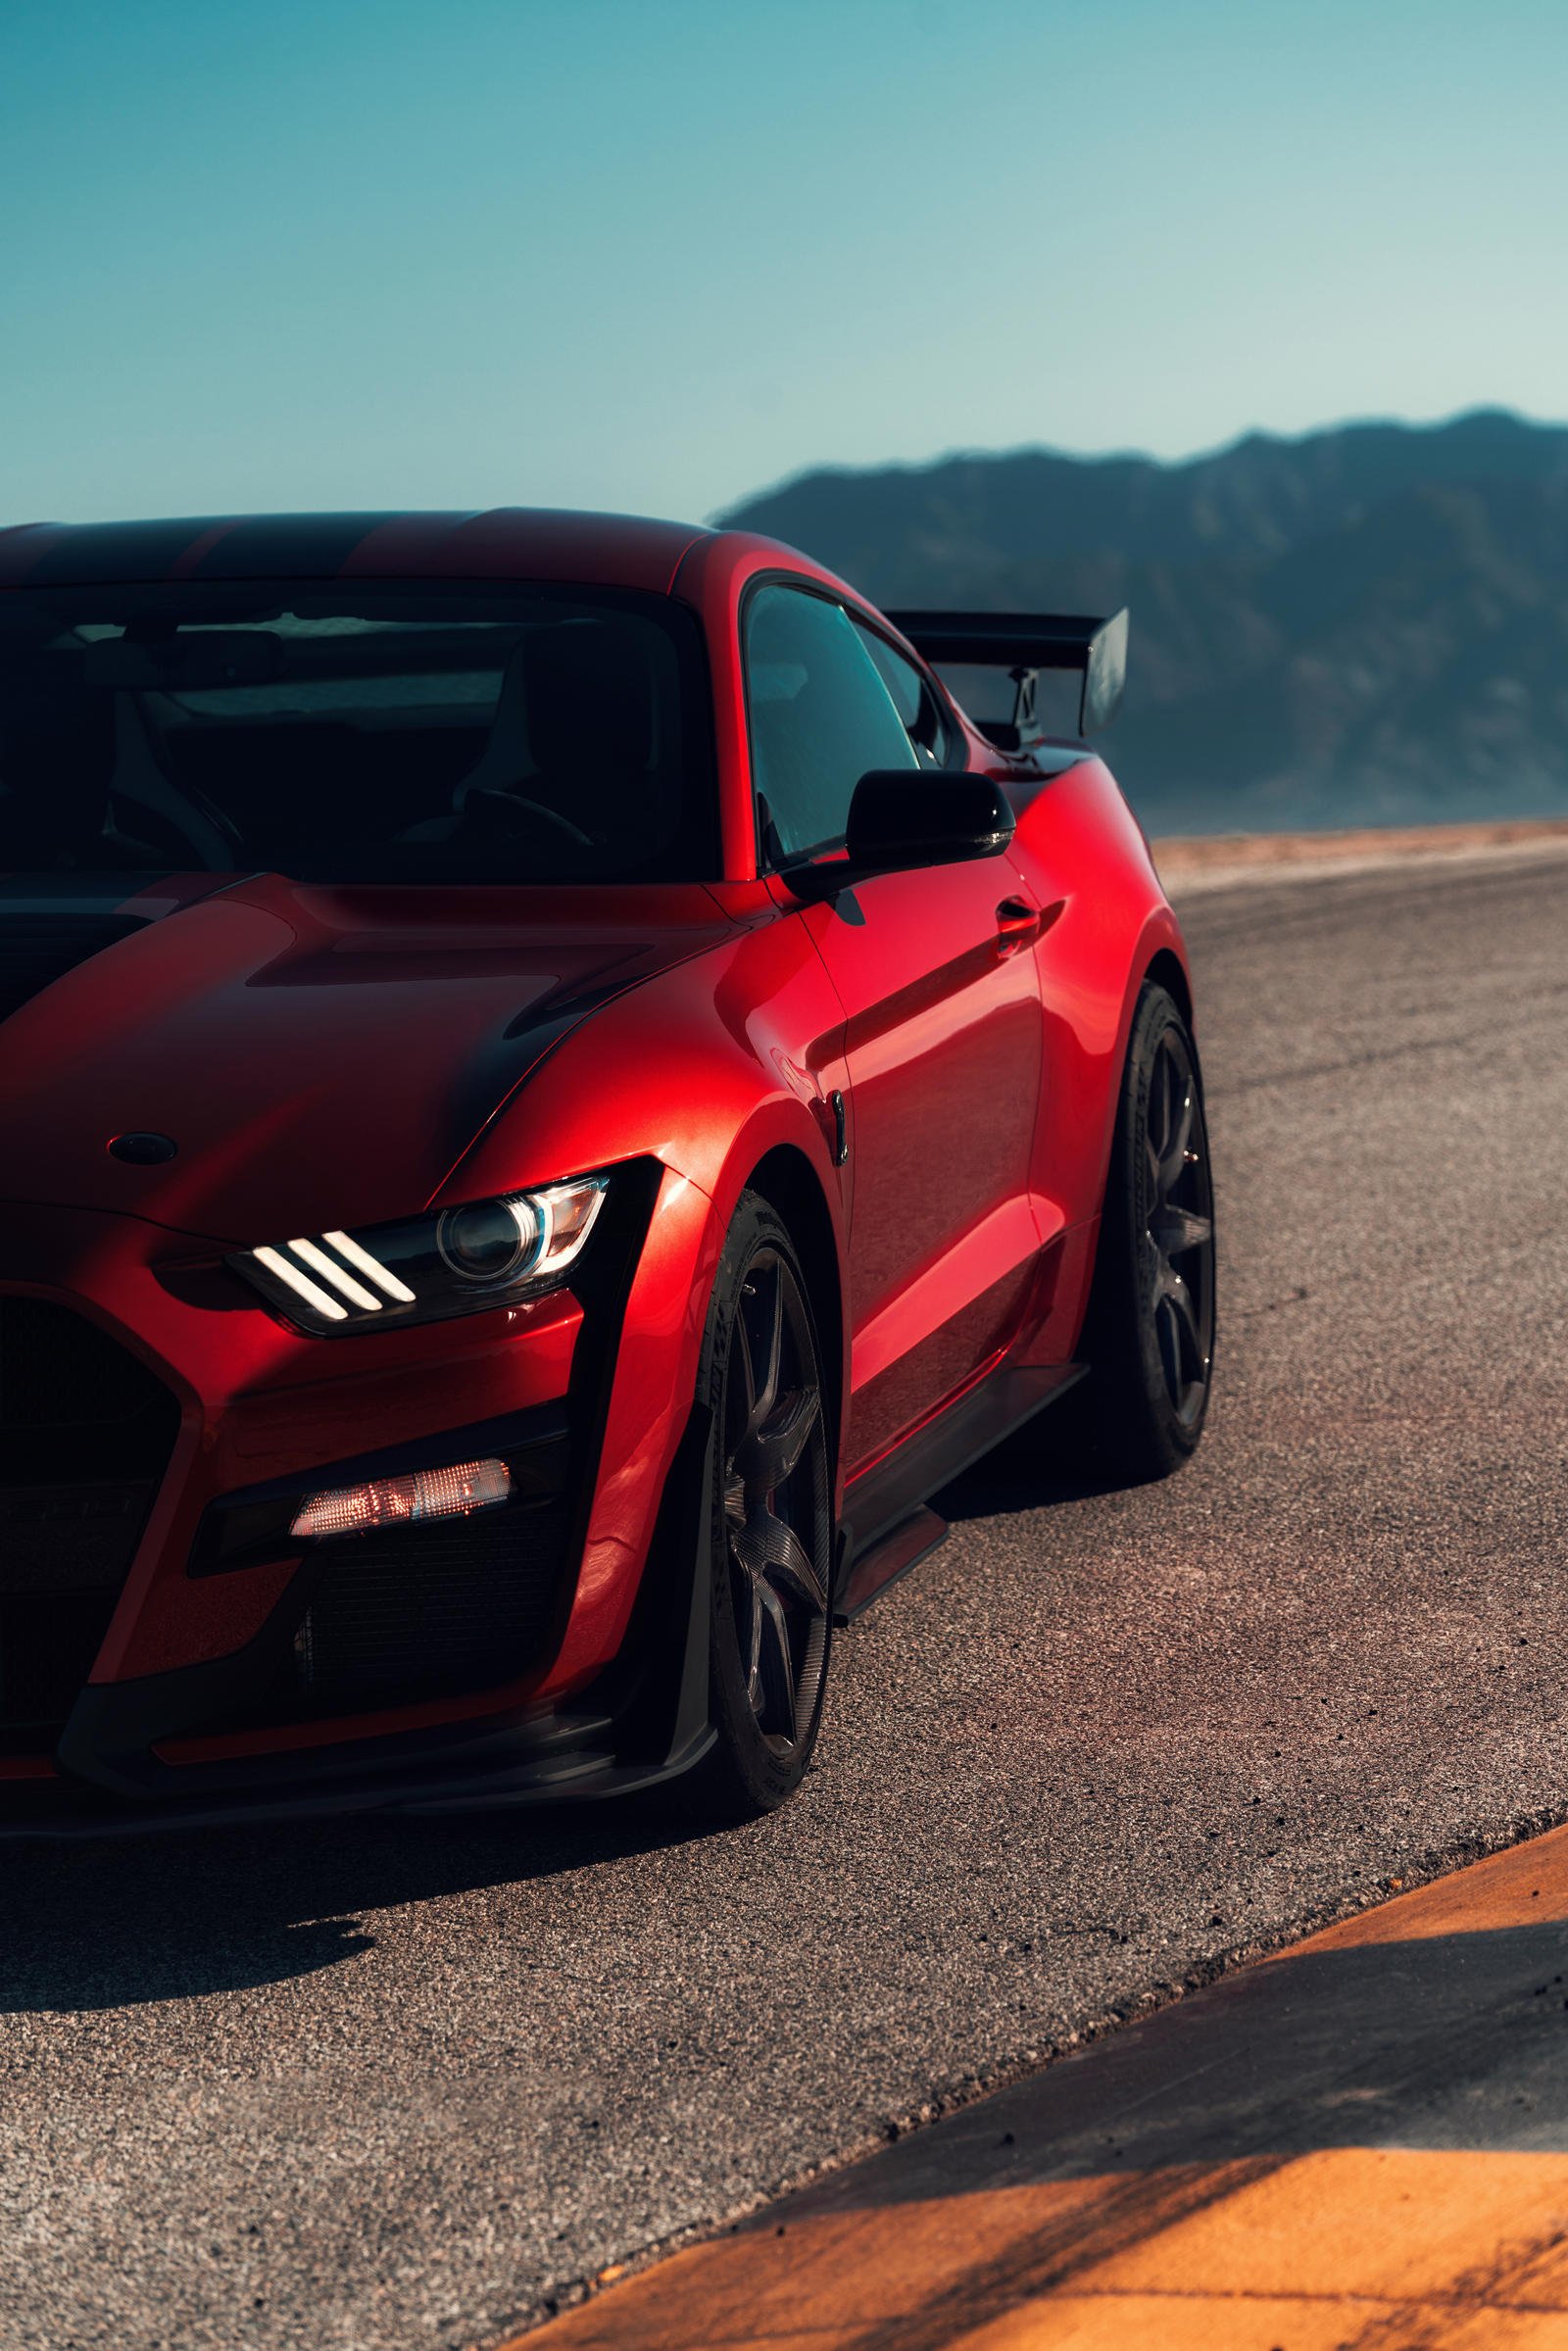 2022 Ford Mustang Shelby GT500 Exterior Dimensions: Colors Options & Accessories